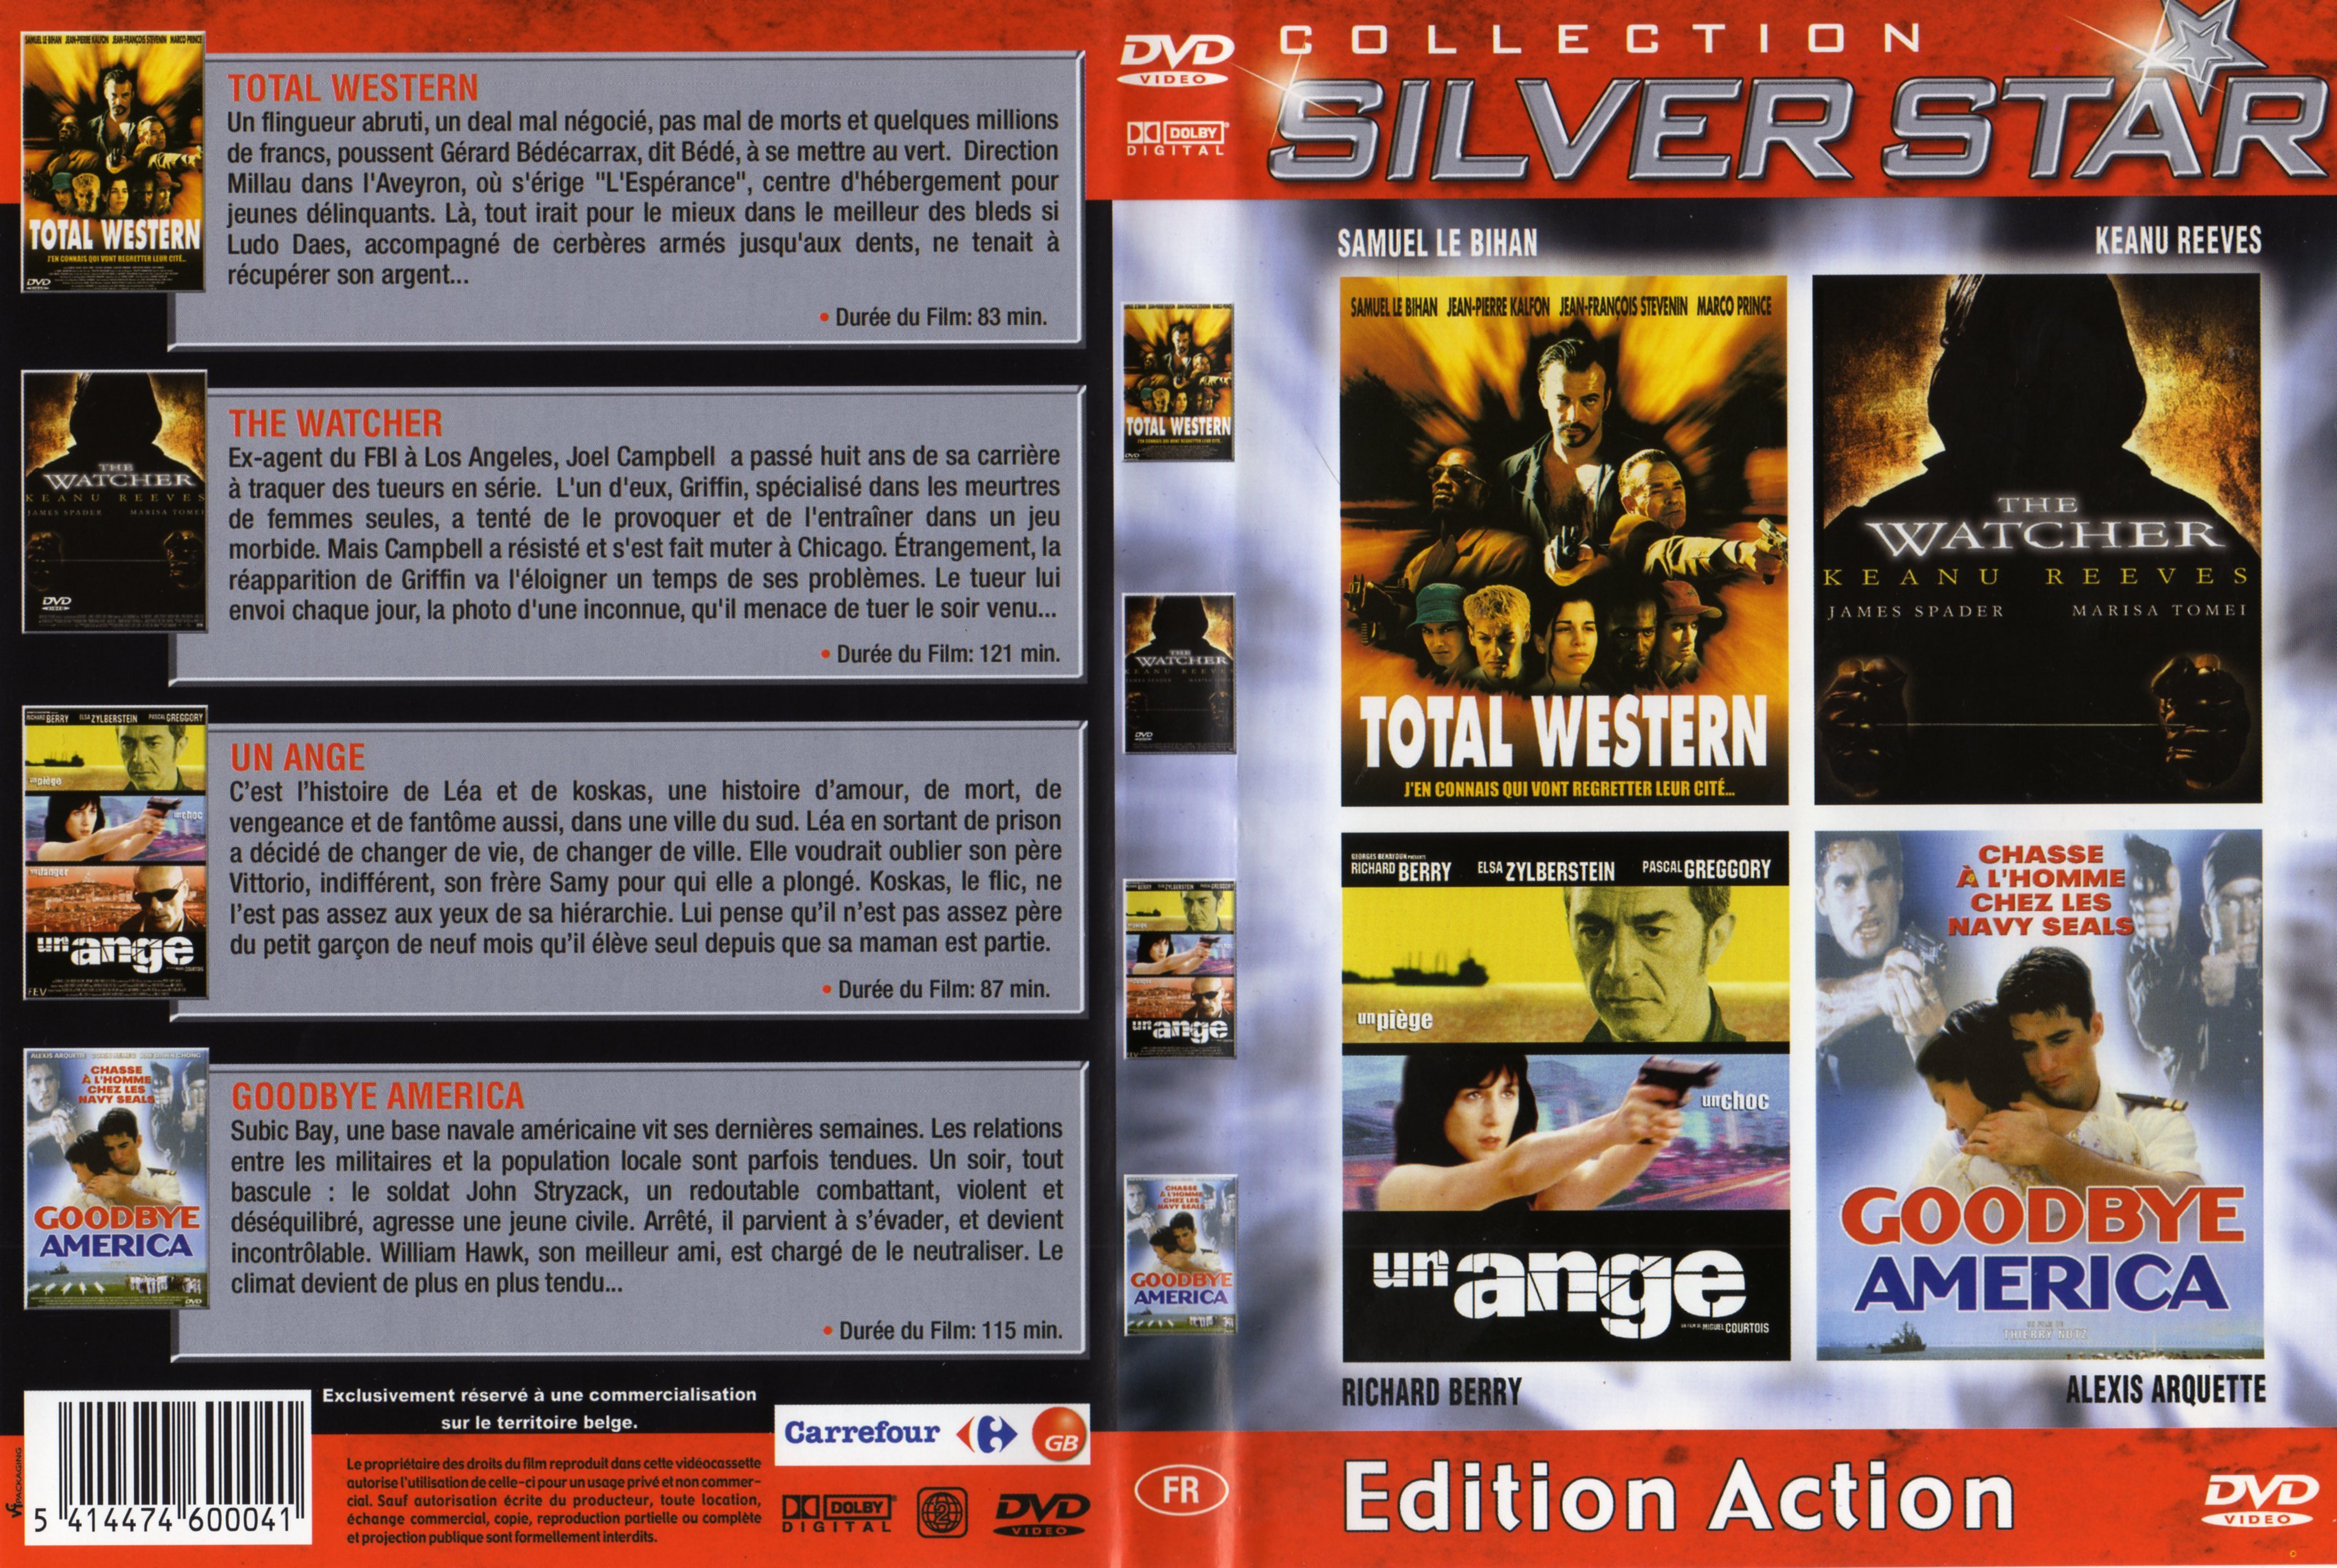 Jaquette DVD Collection silver star Edition Action